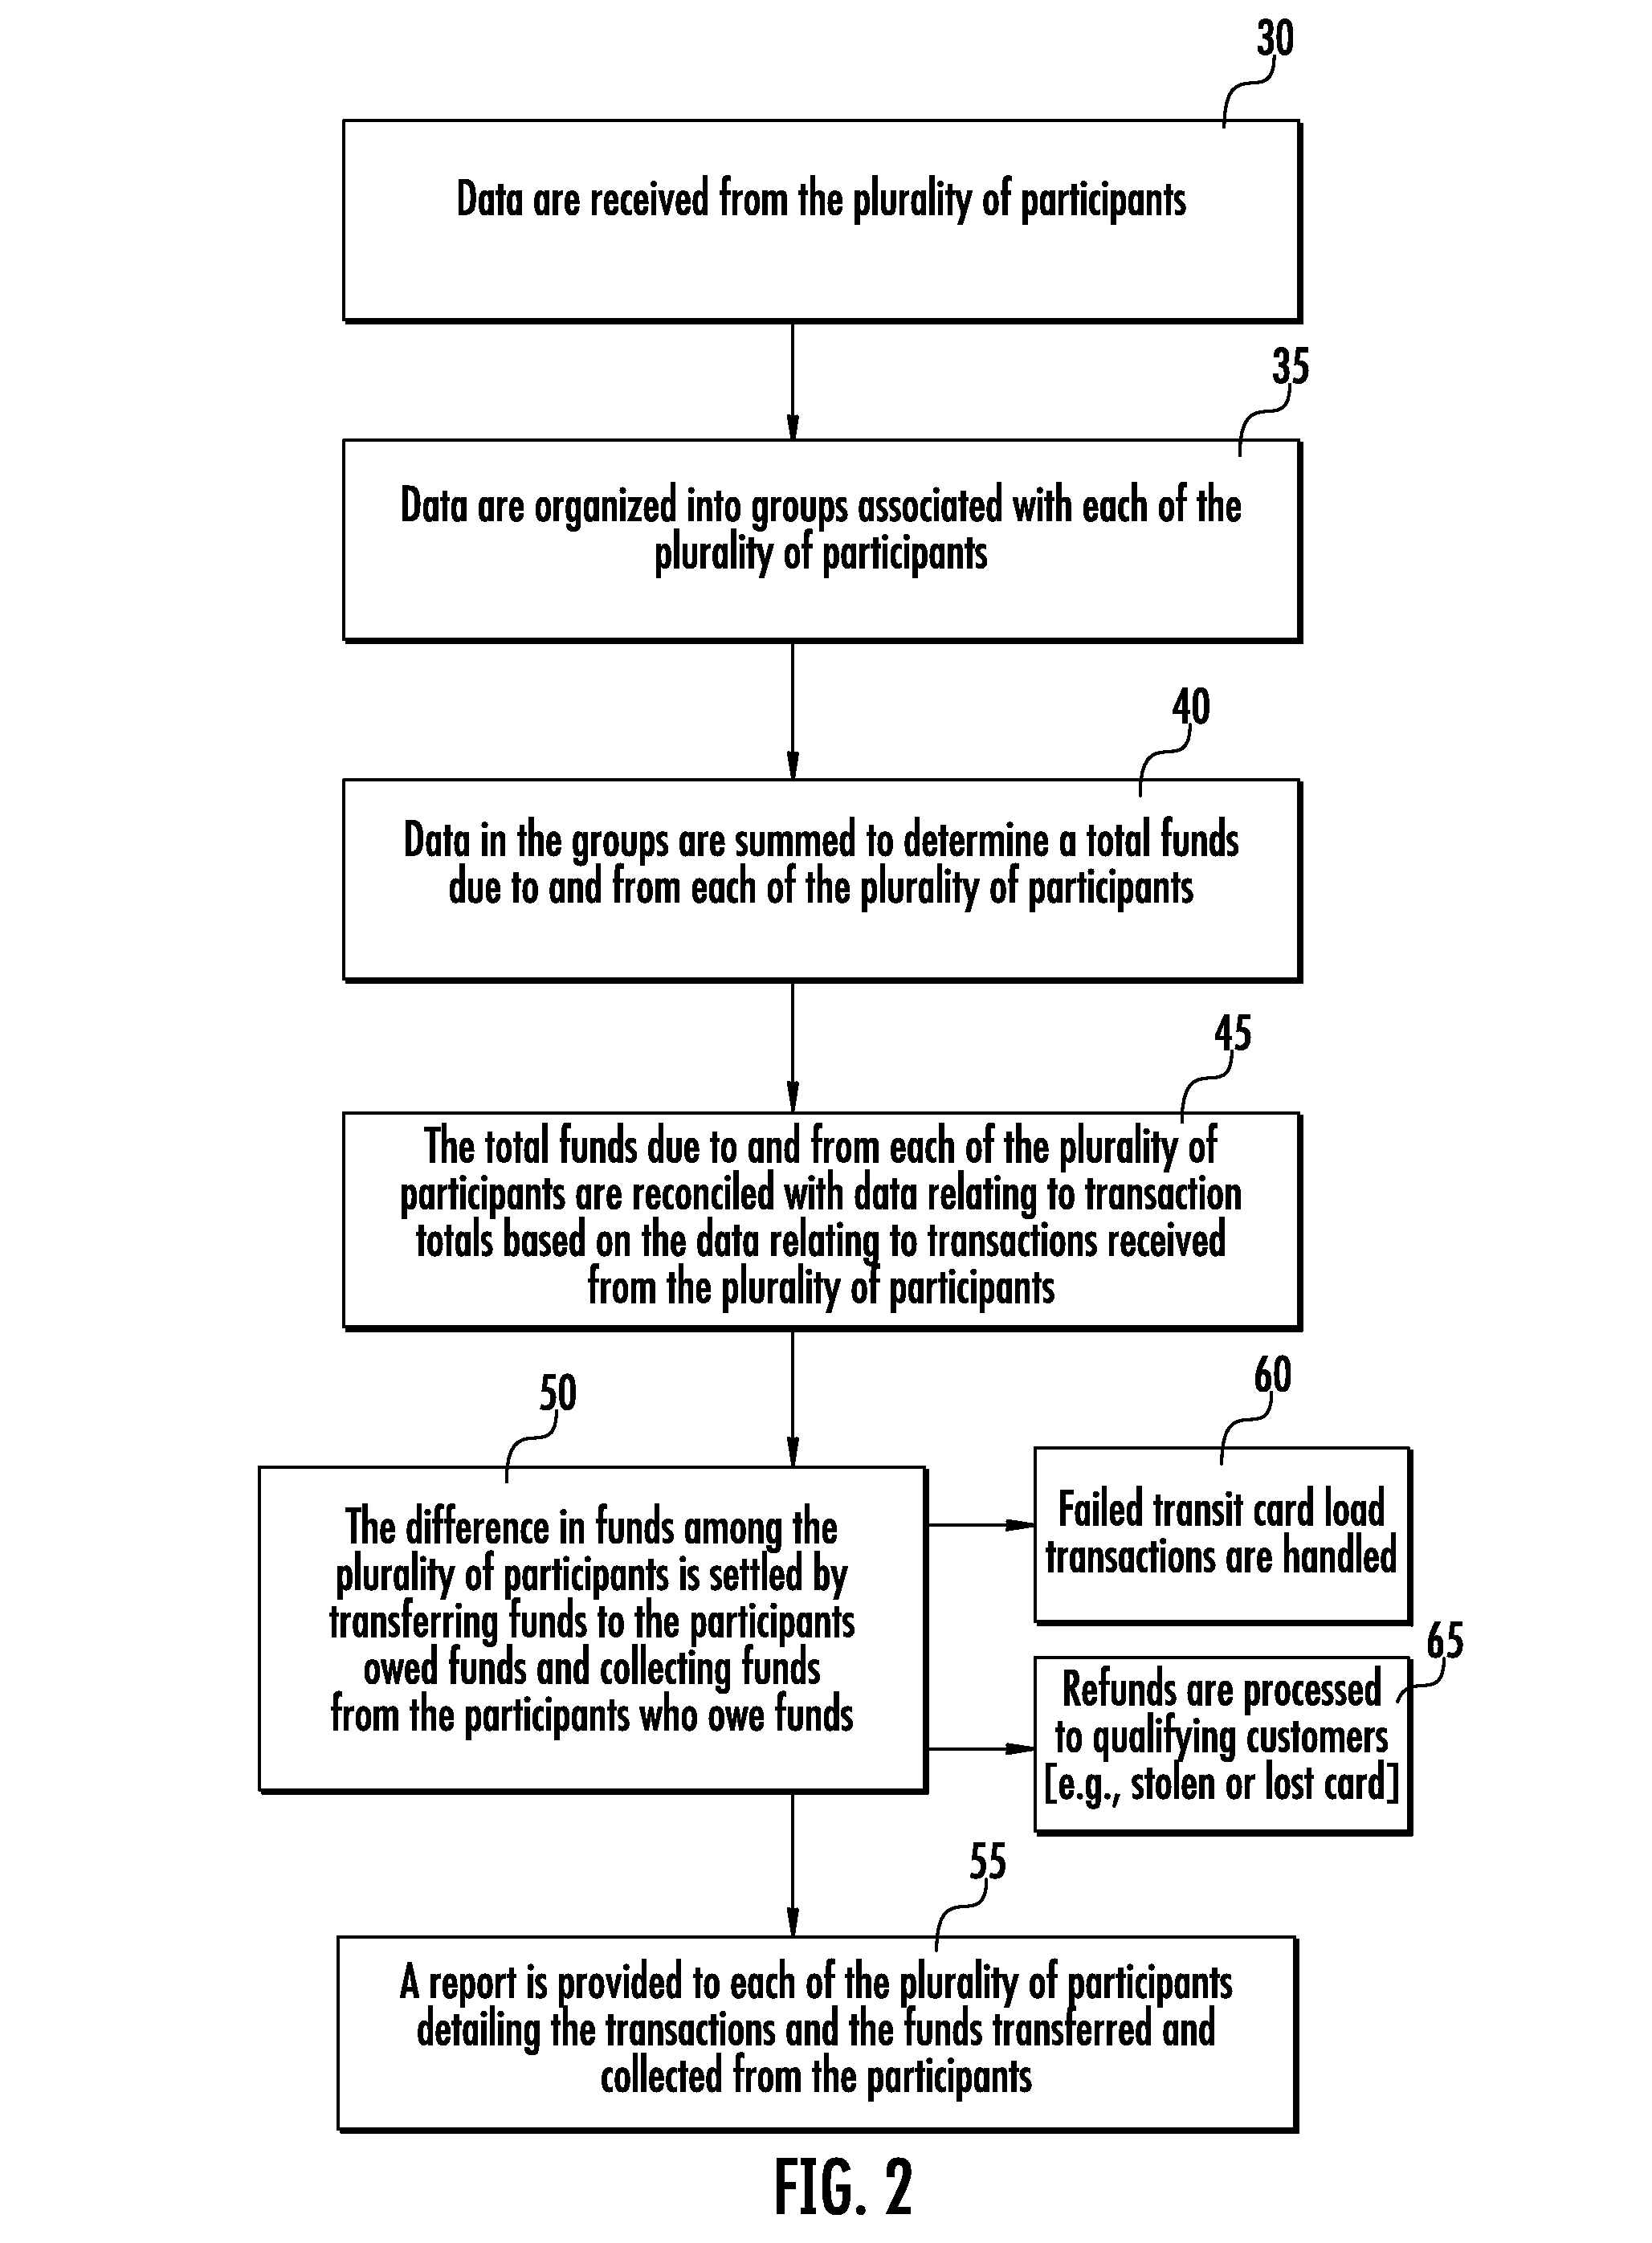 Process and system for the clearing and settling of transactions